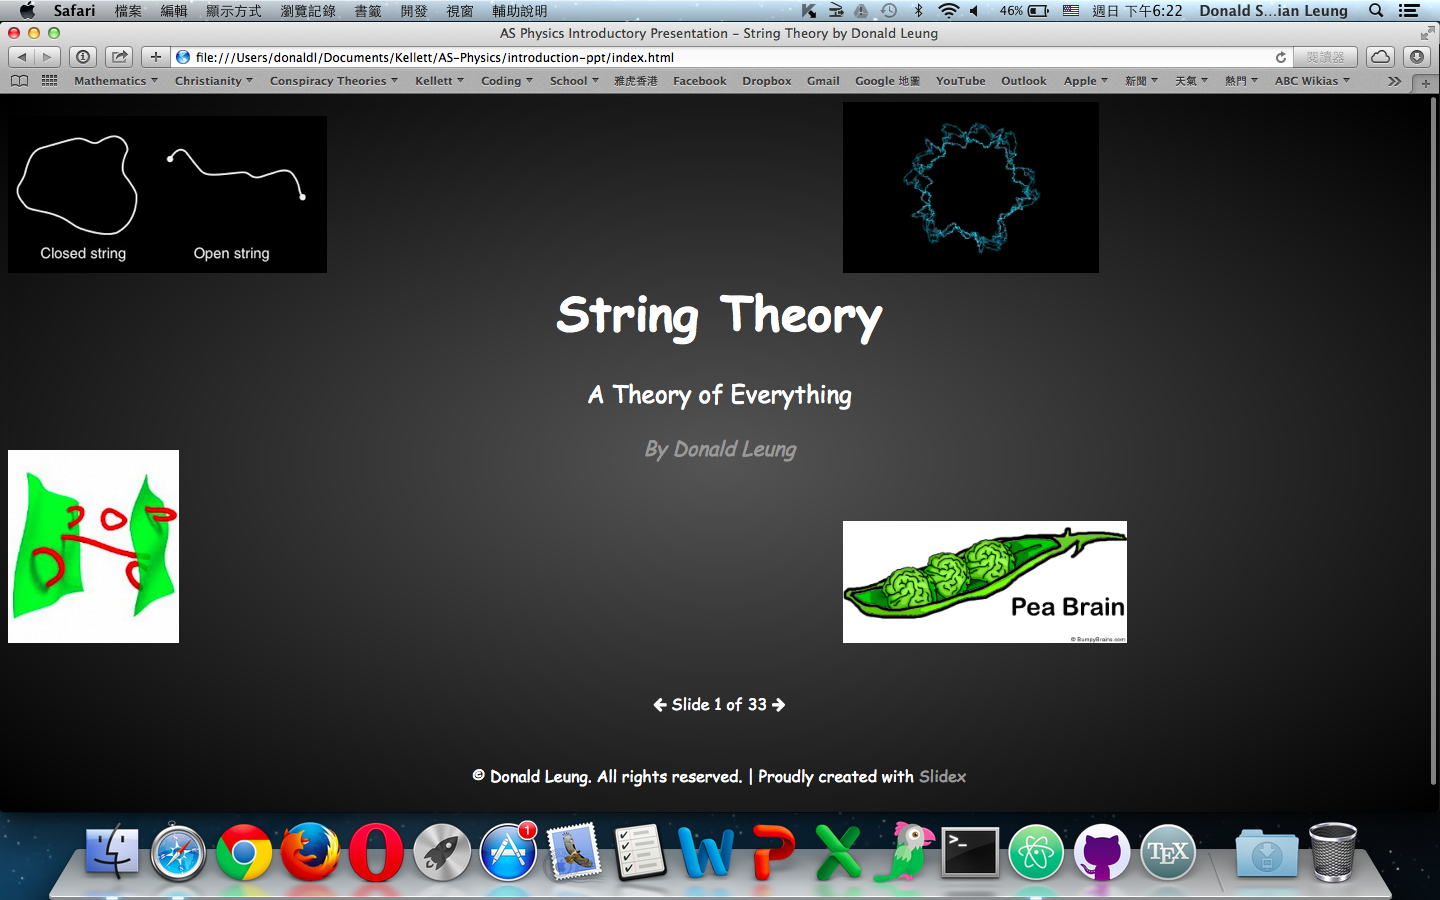 AS Physics Introductory Presentation - String Theory